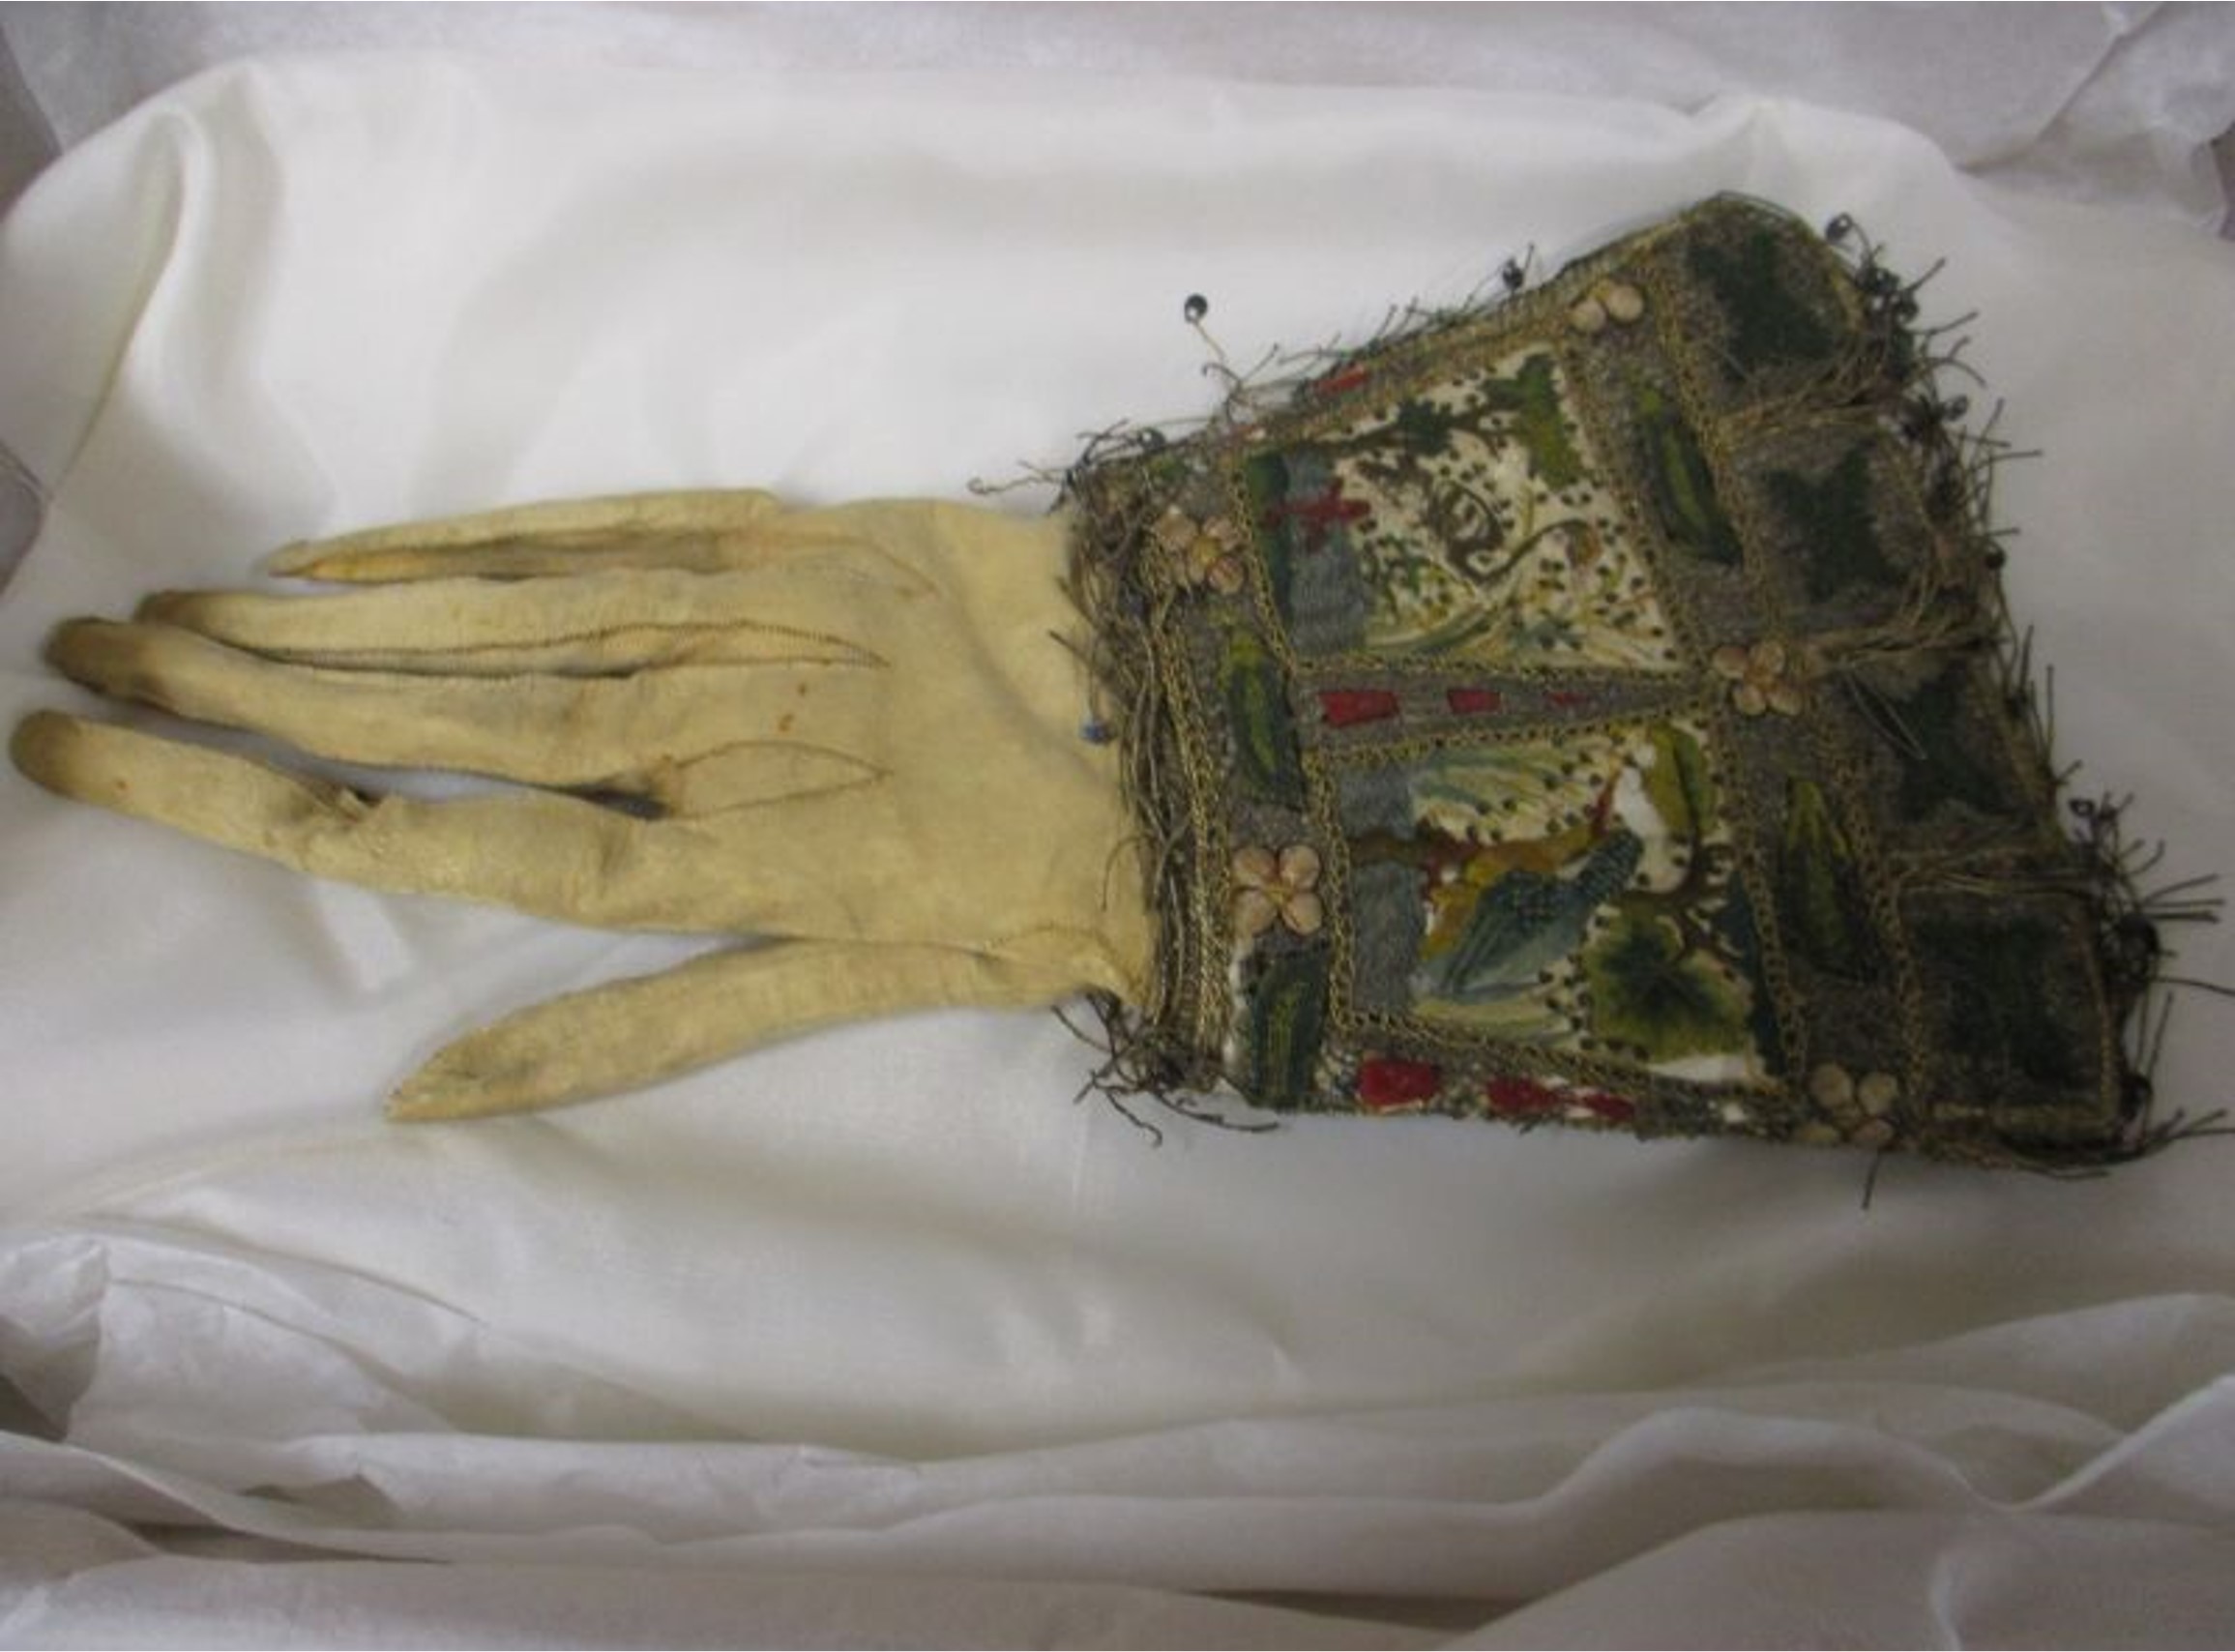 17th Century glove with Kingfisher embroidery